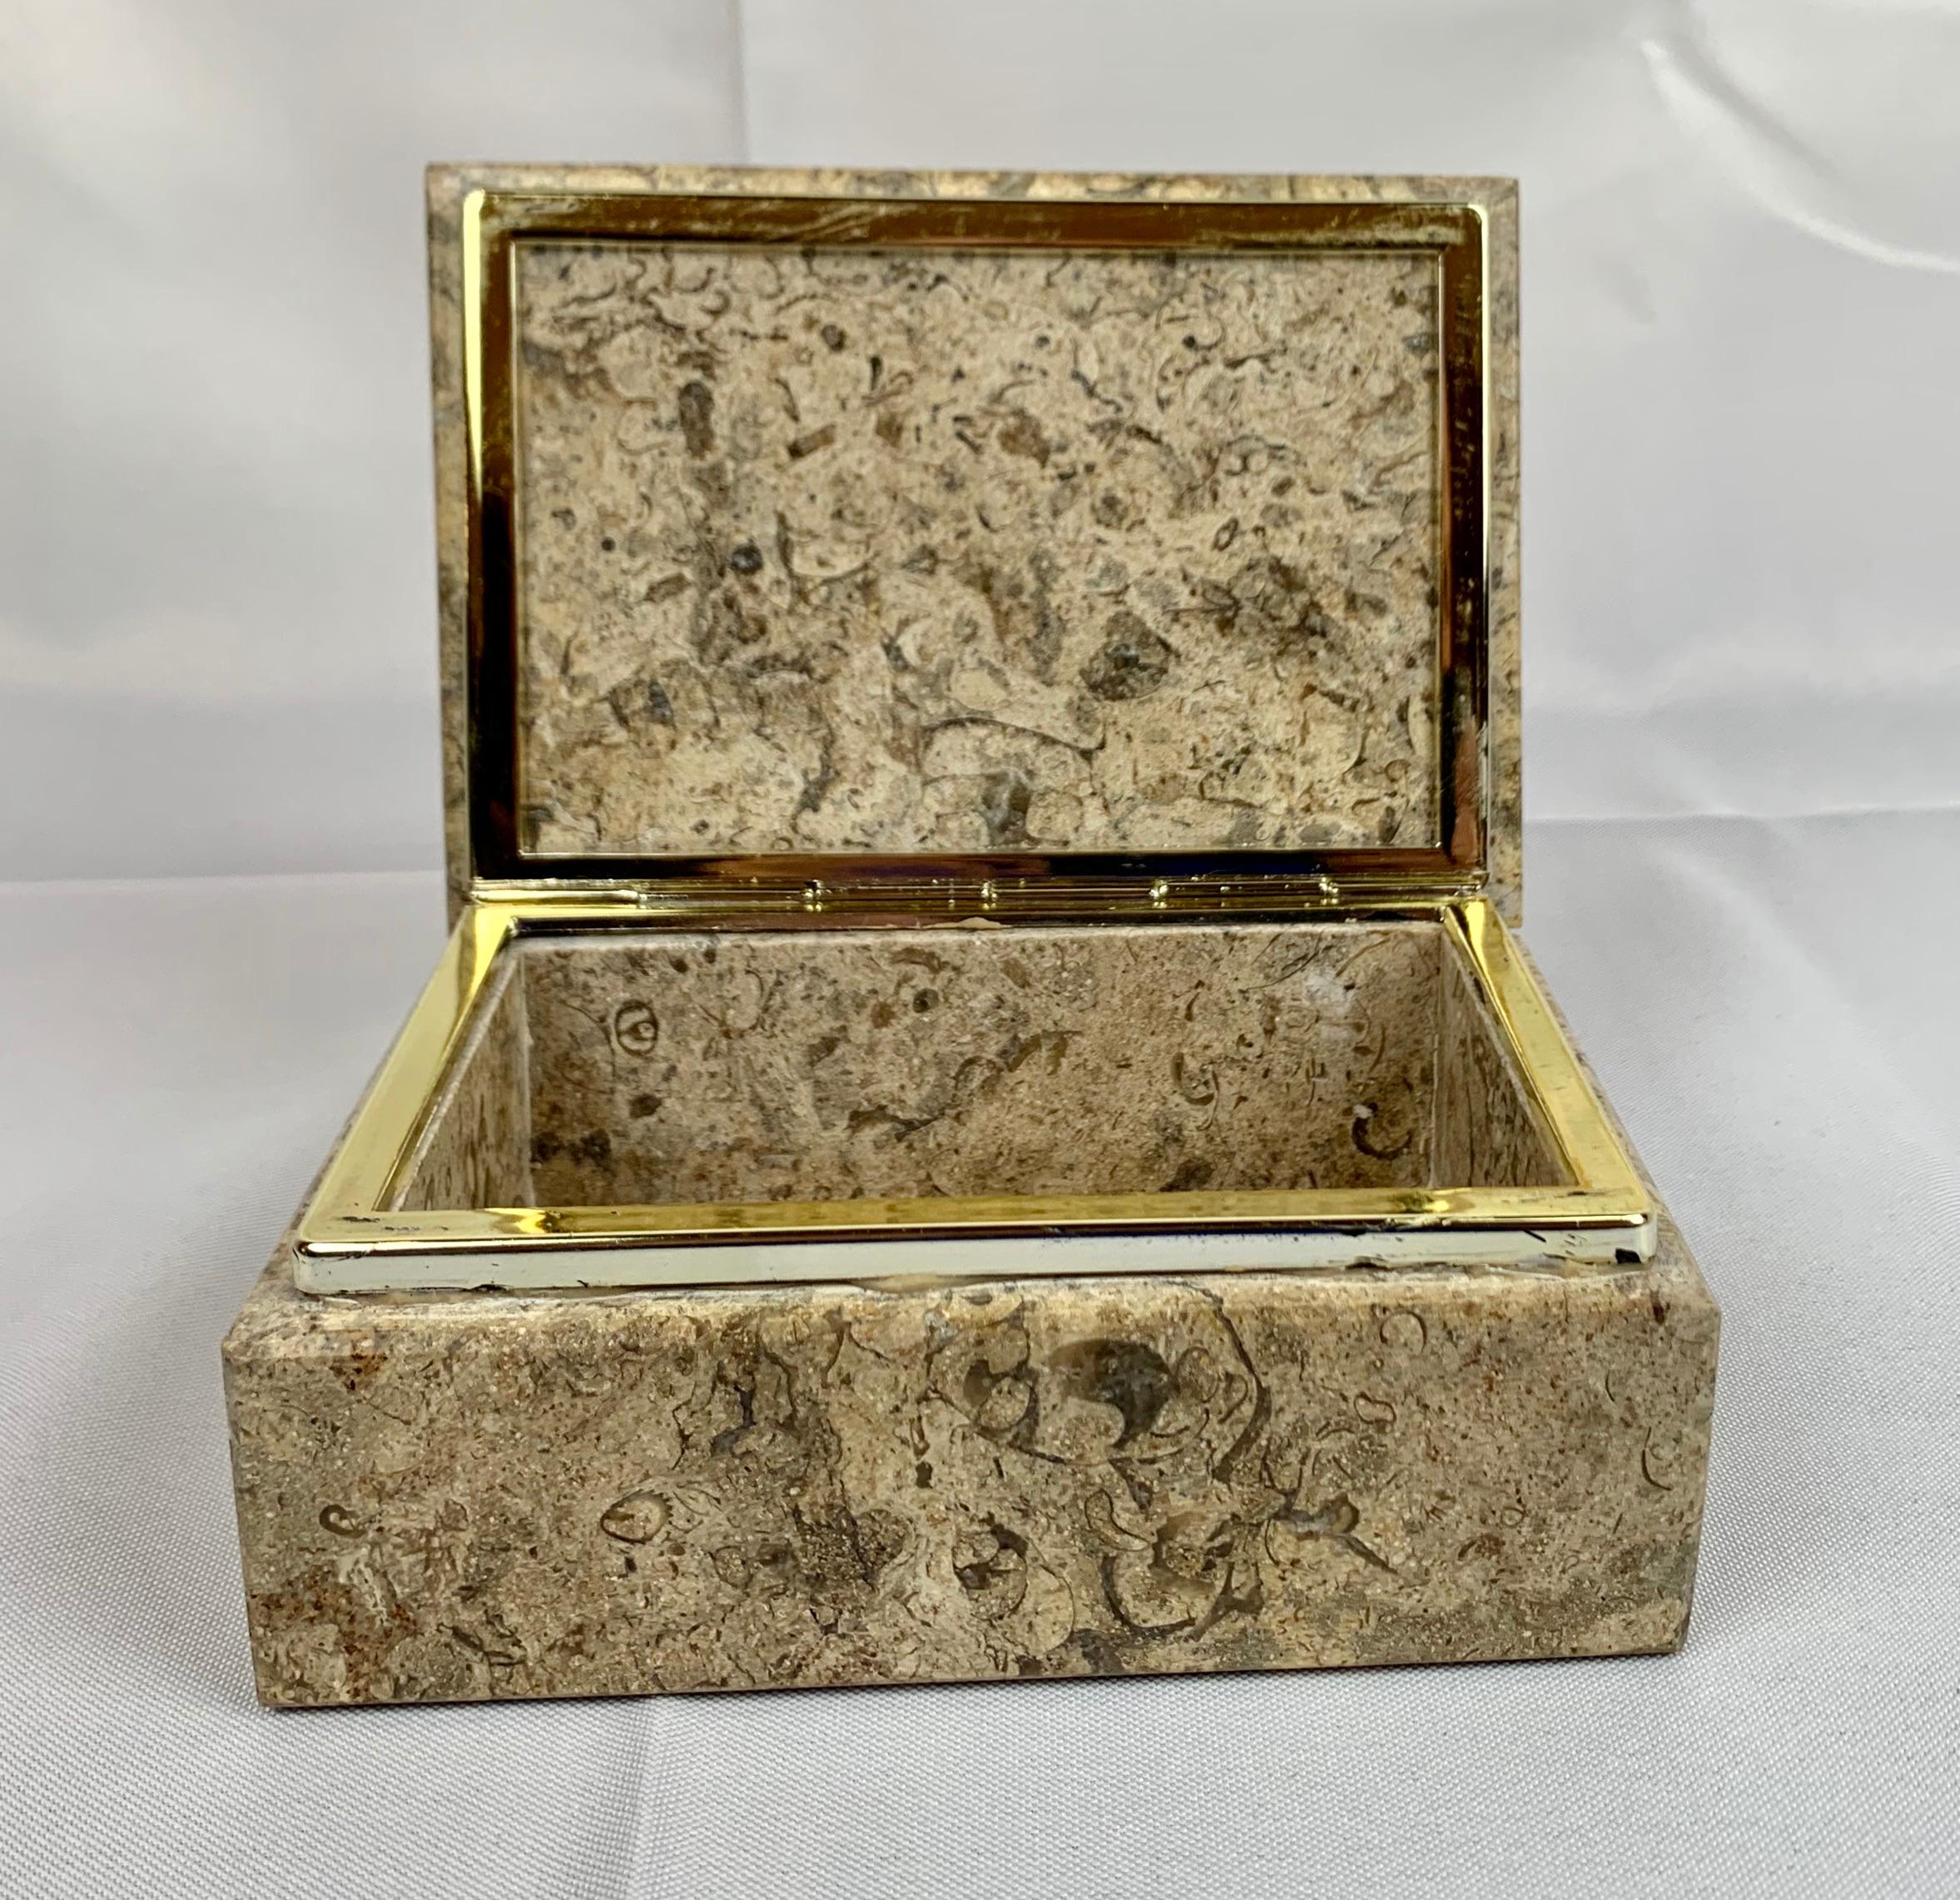 A hinged Rectangular light beige stone box with silvered frame.
Perfect for jewelry, keepsakes or on a desk to hold paperclips..........
Why not place it on a table just for good looks.
top-5.5